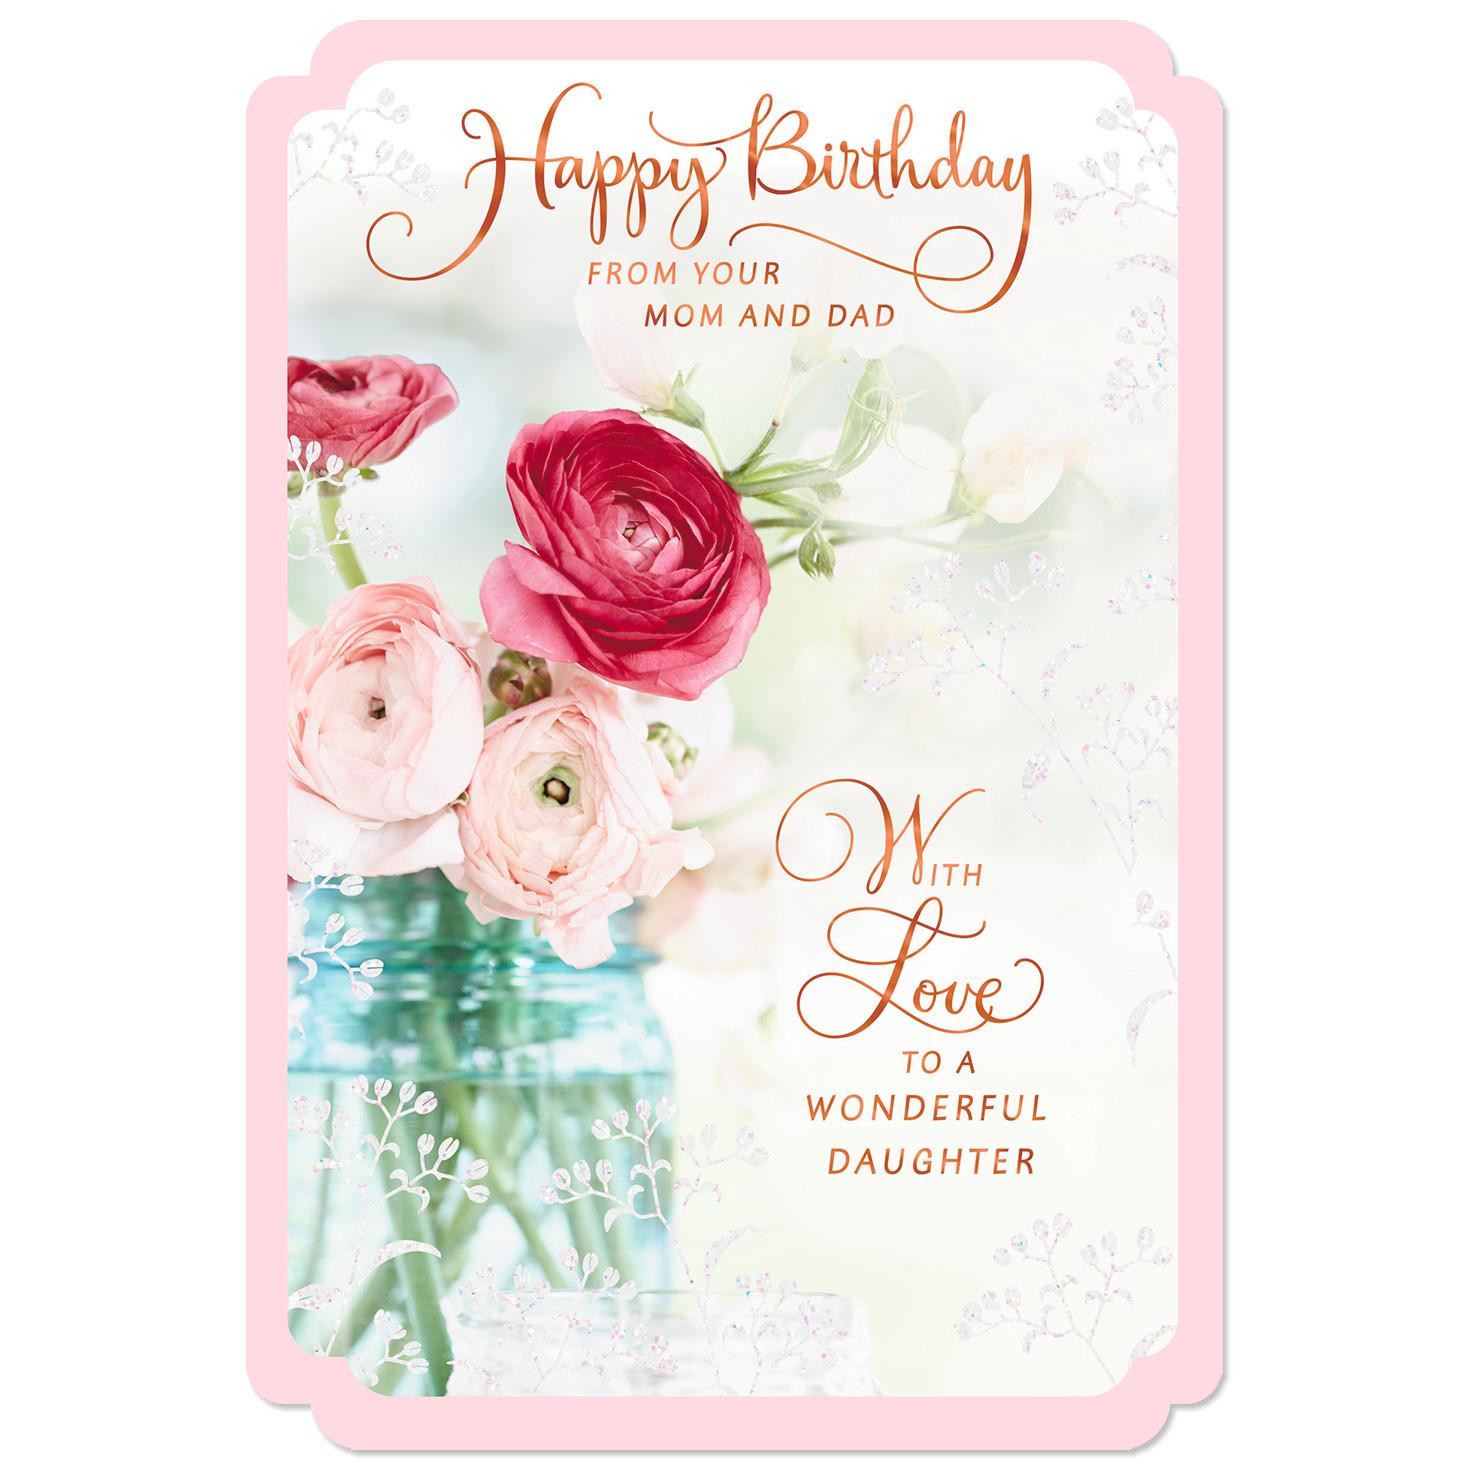 Birthday Cards For Mom From Daughter
 Wishes for a Wonderful Daughter Birthday Card from Mom and